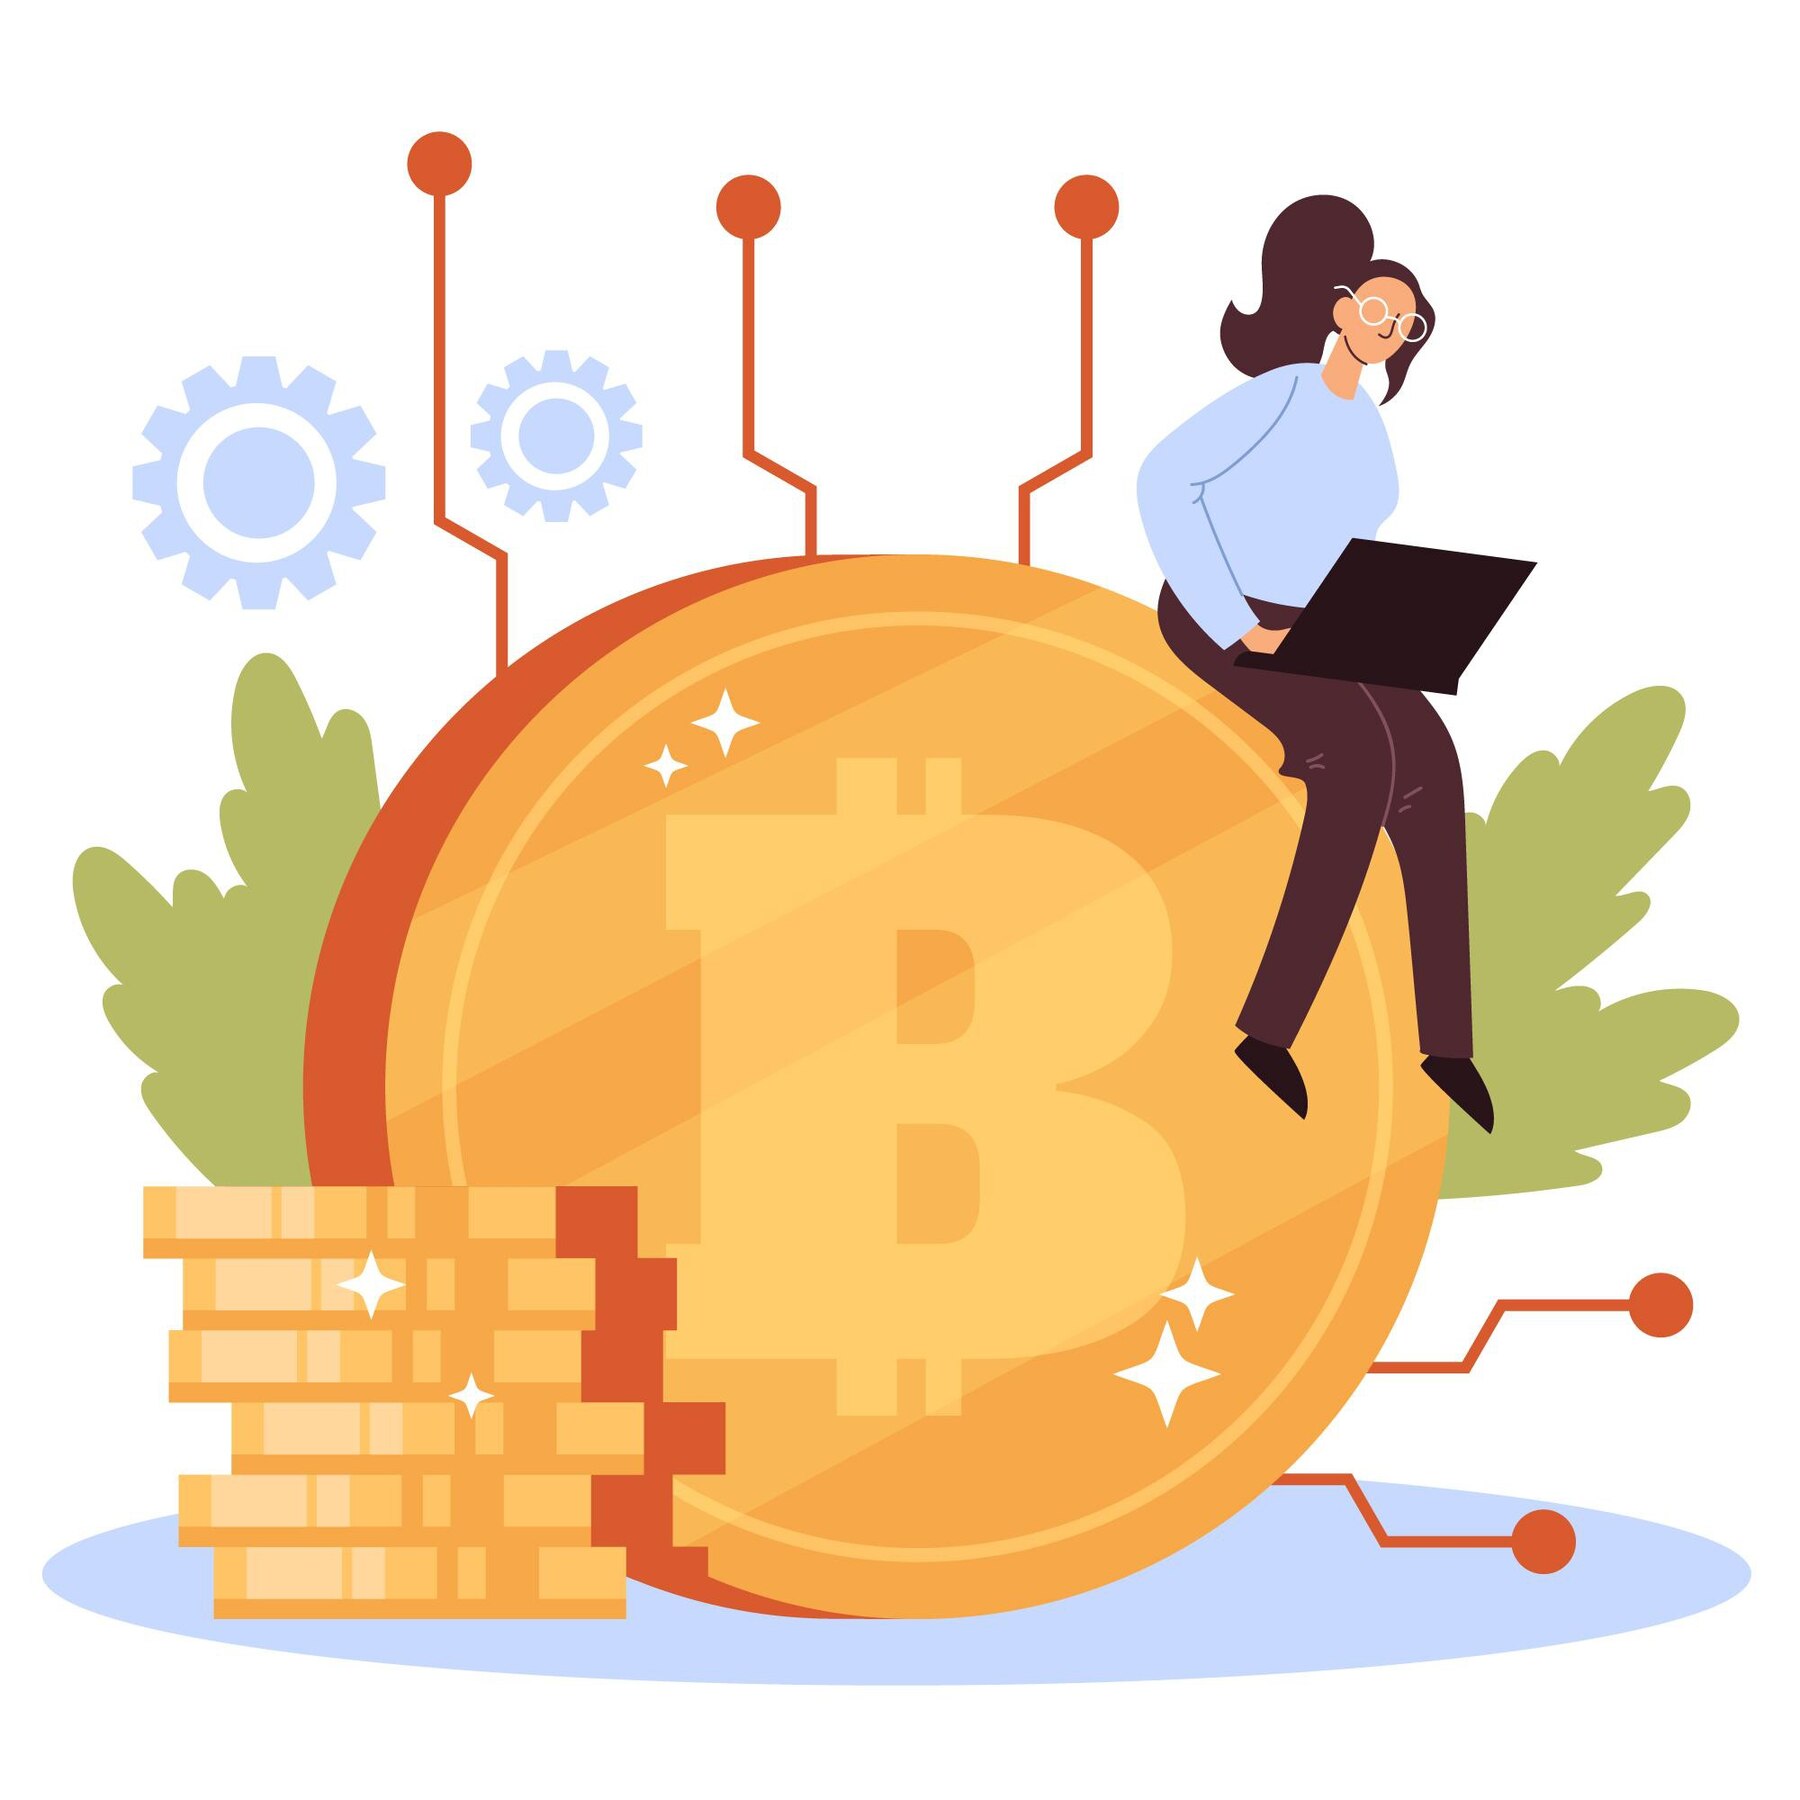 flat-design-cryptocurrency-concept-with-coin_23-2149162436.jpg